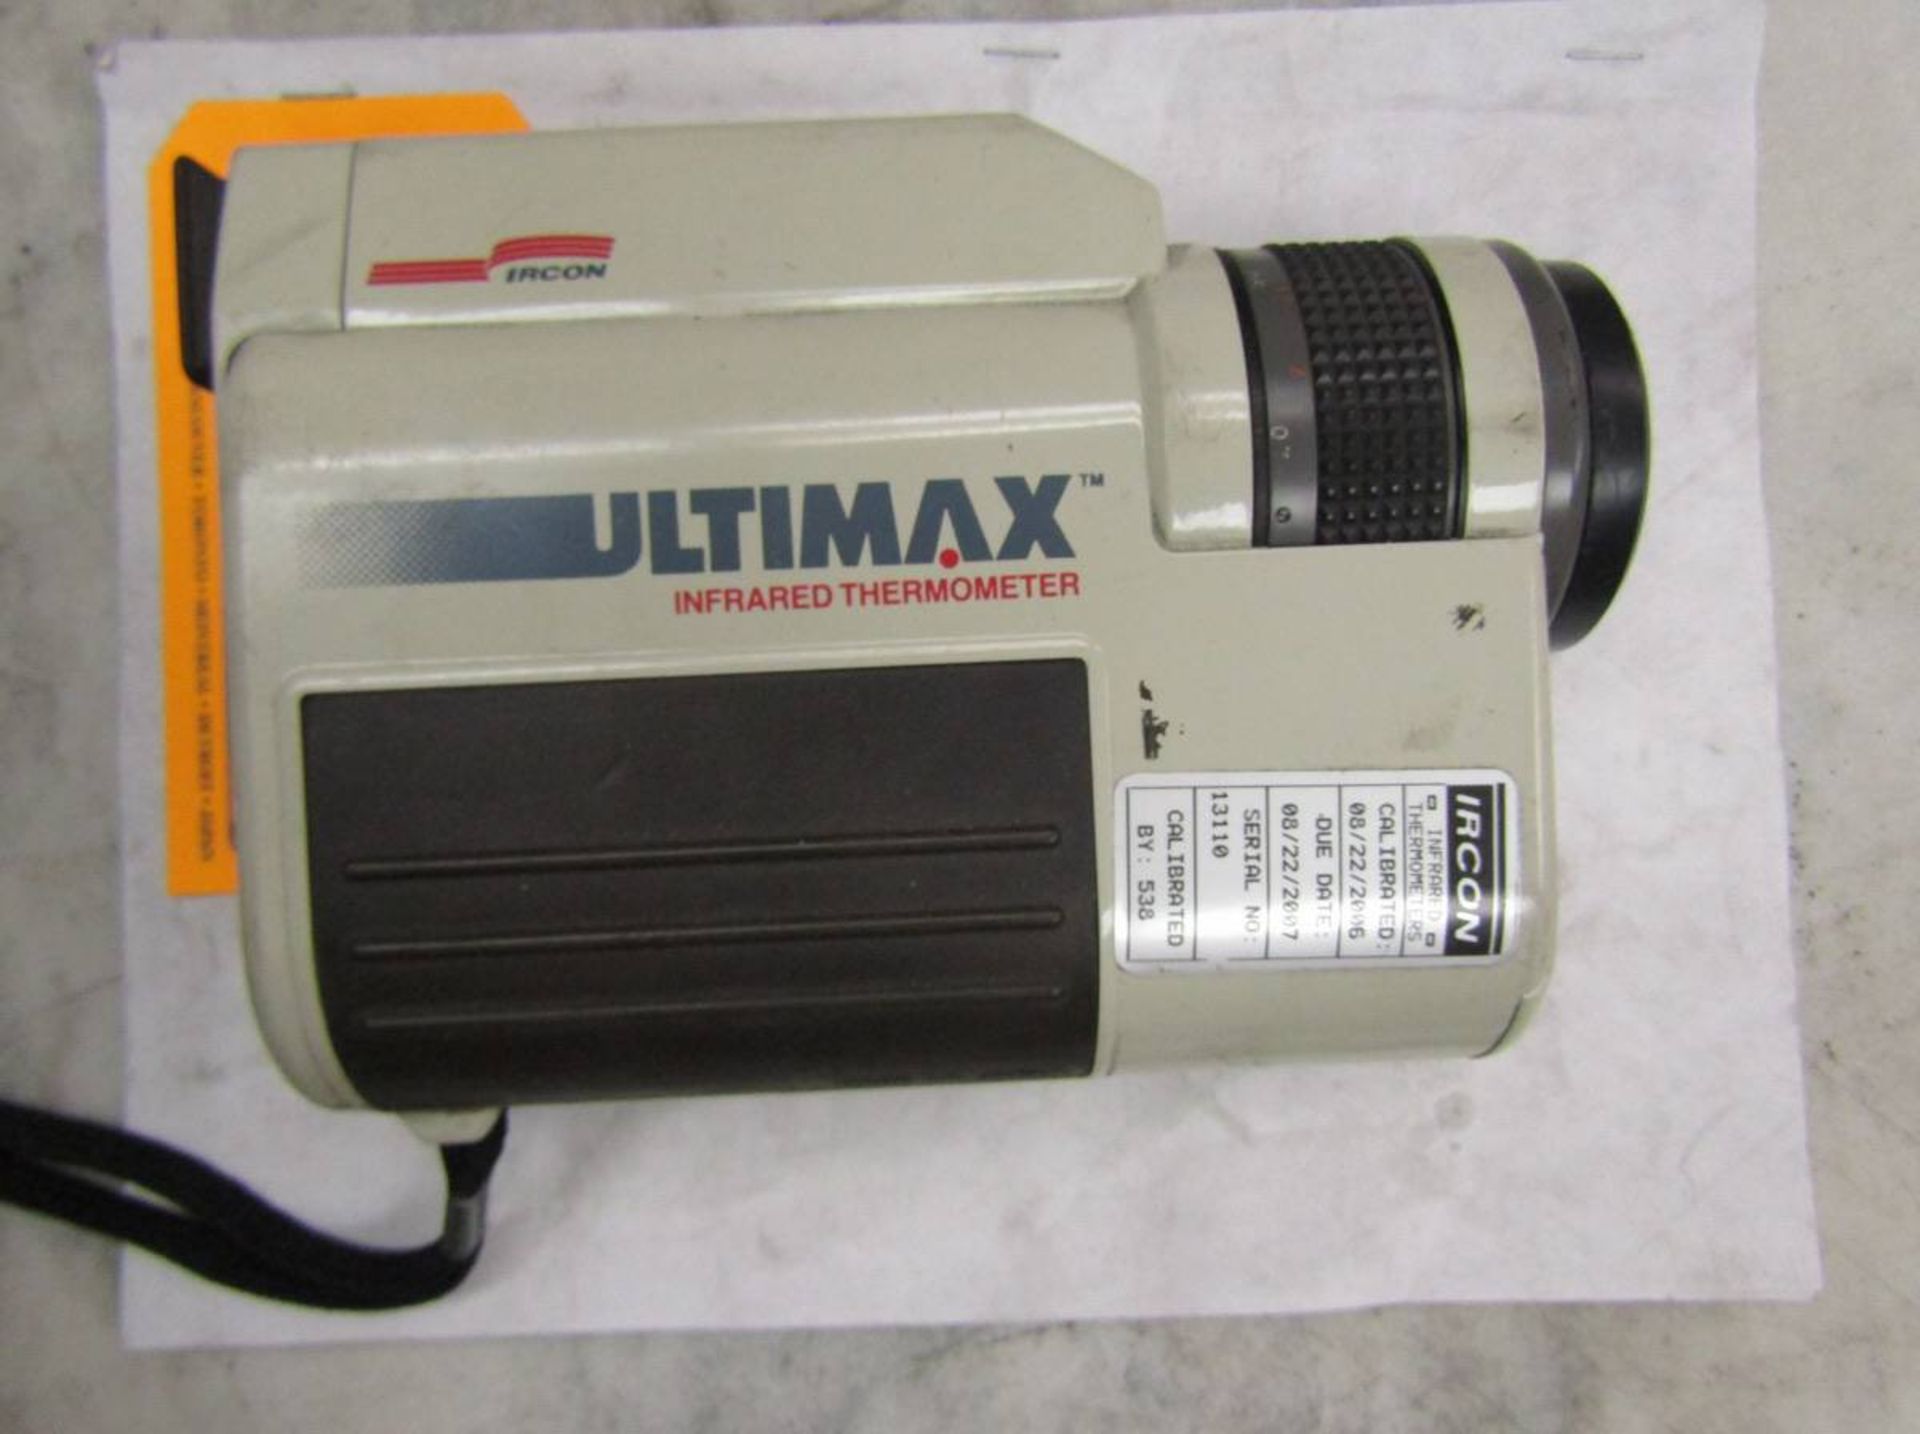 Ircon Ultimax UX-20 Infrared Thermometer - Image 3 of 3